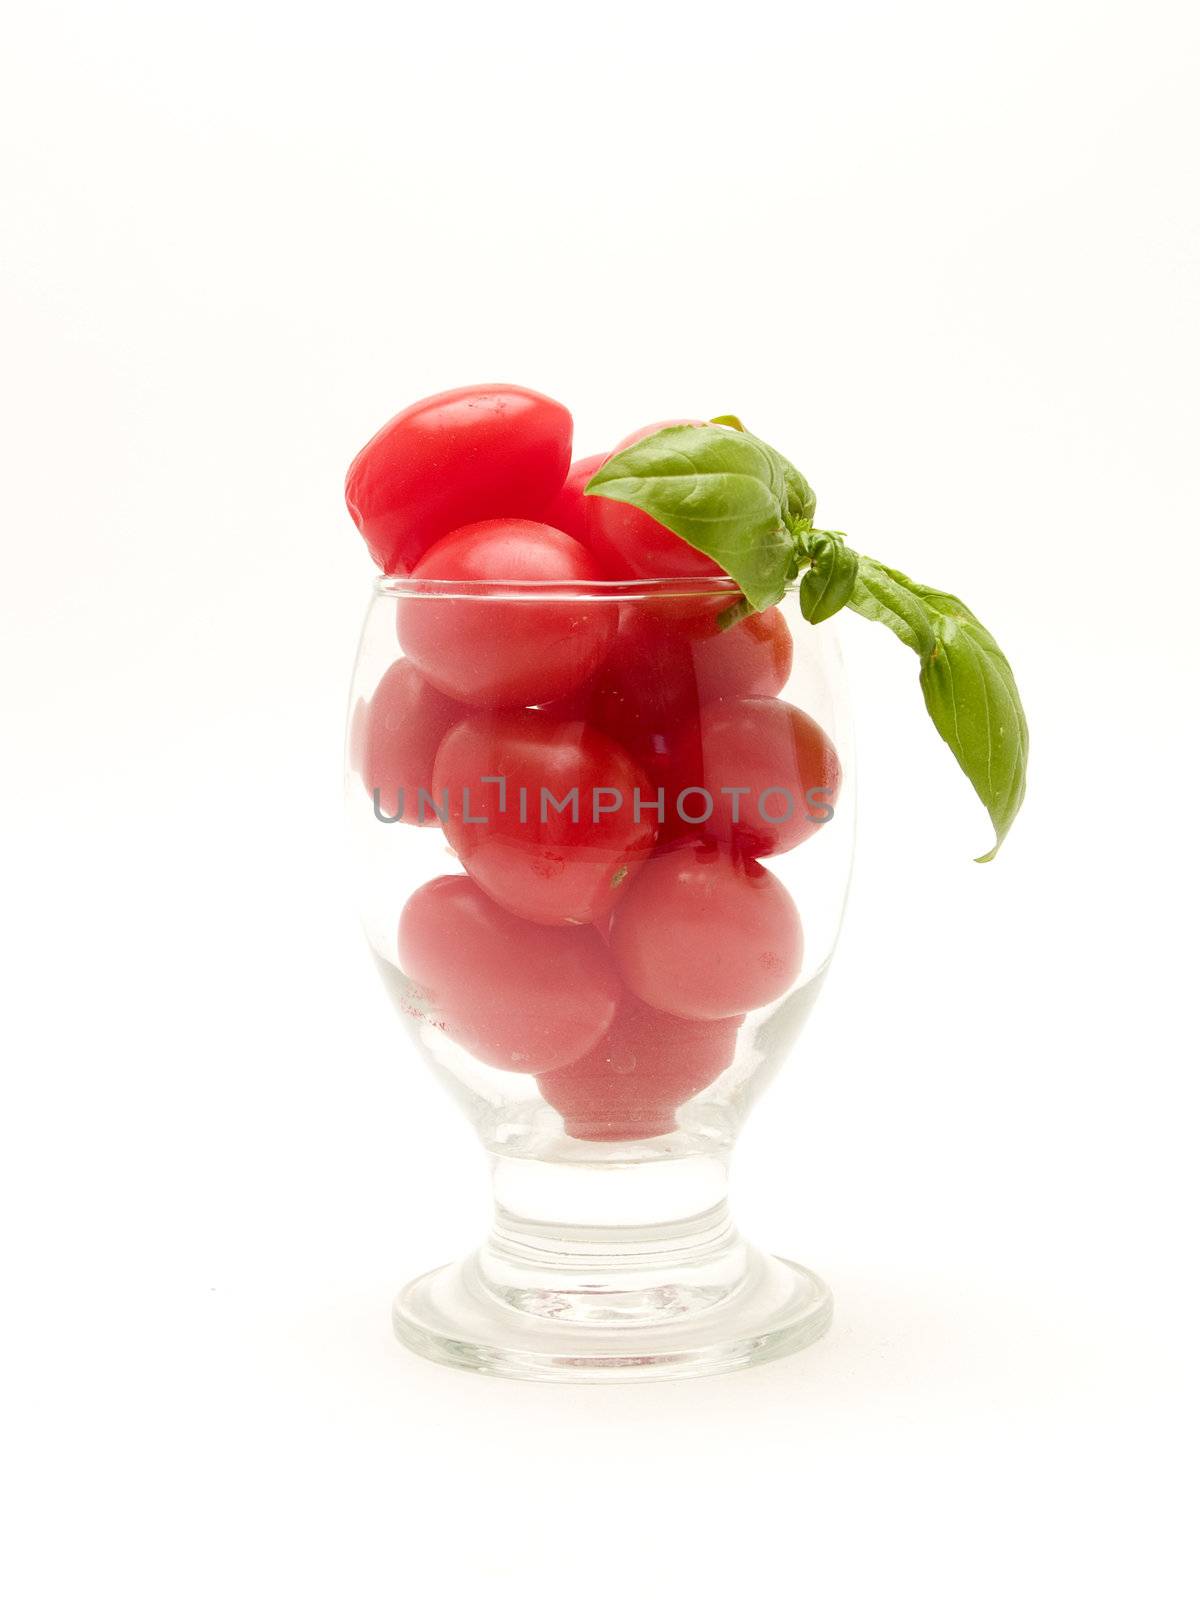 Tomato cherry  by lauria